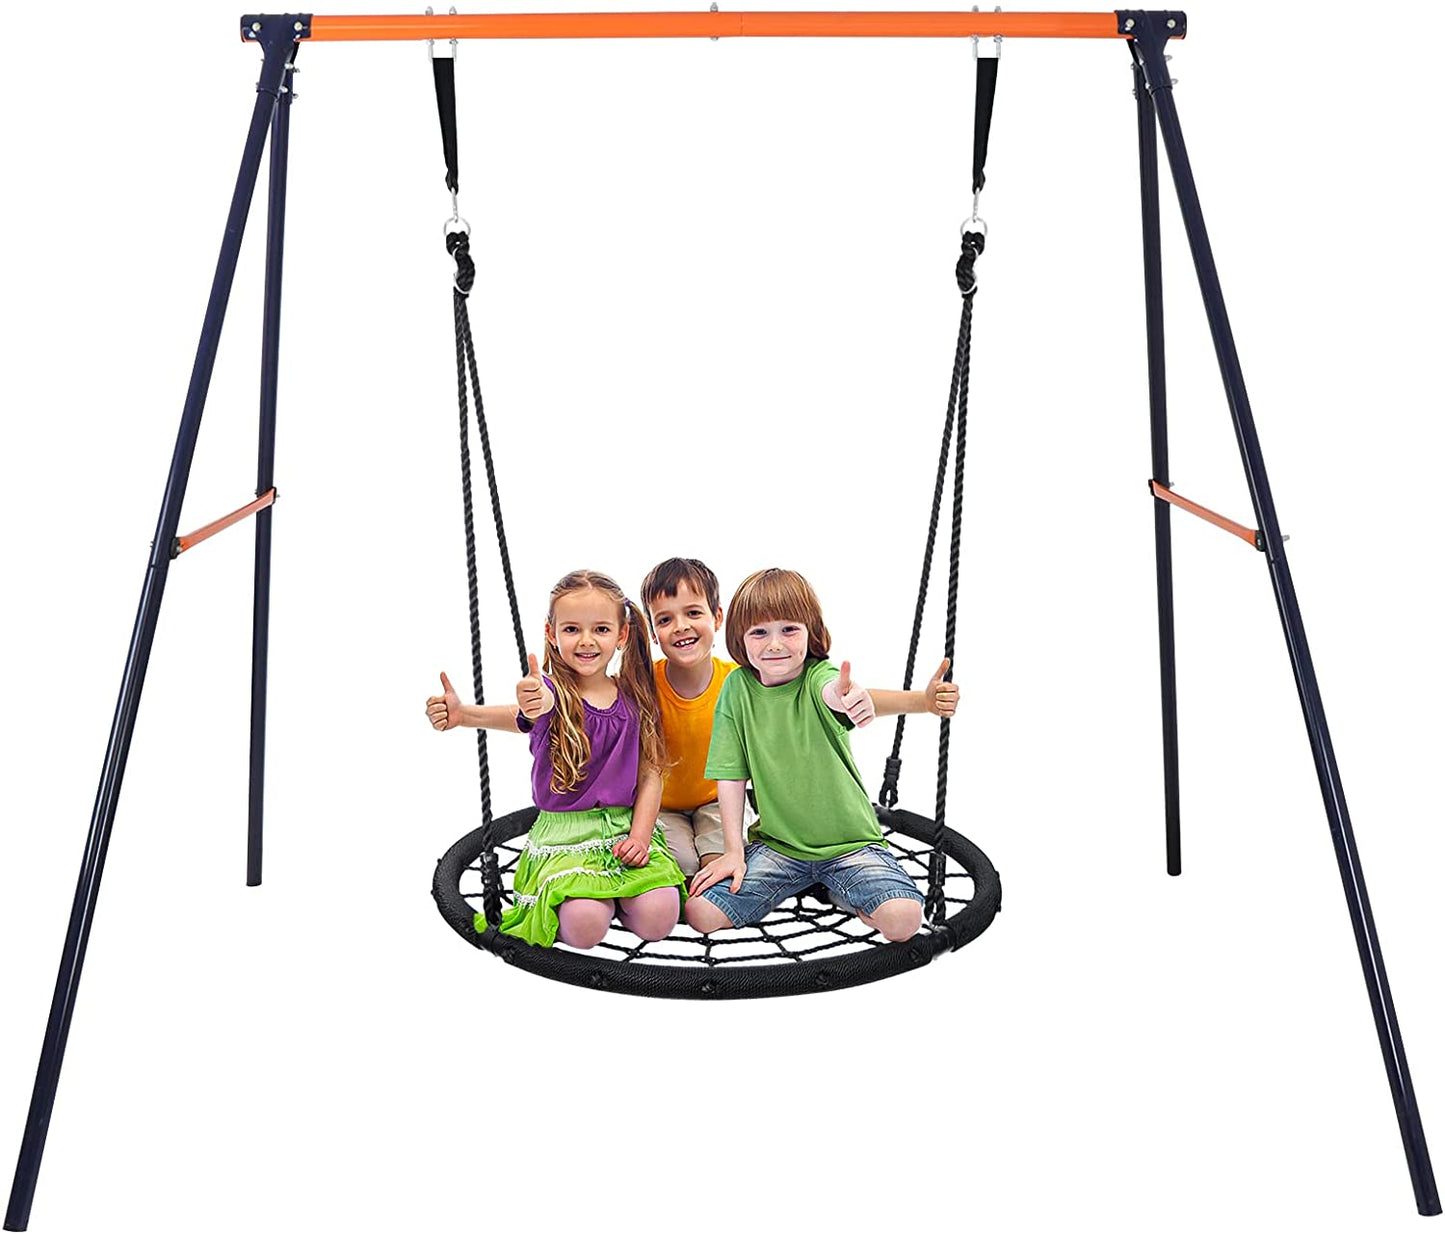 Swing Set for Backyard, 48 Inch Web Tree Swing with Heavy Duty Metal Frame for Kids, Adults, 440 LBS Capacity